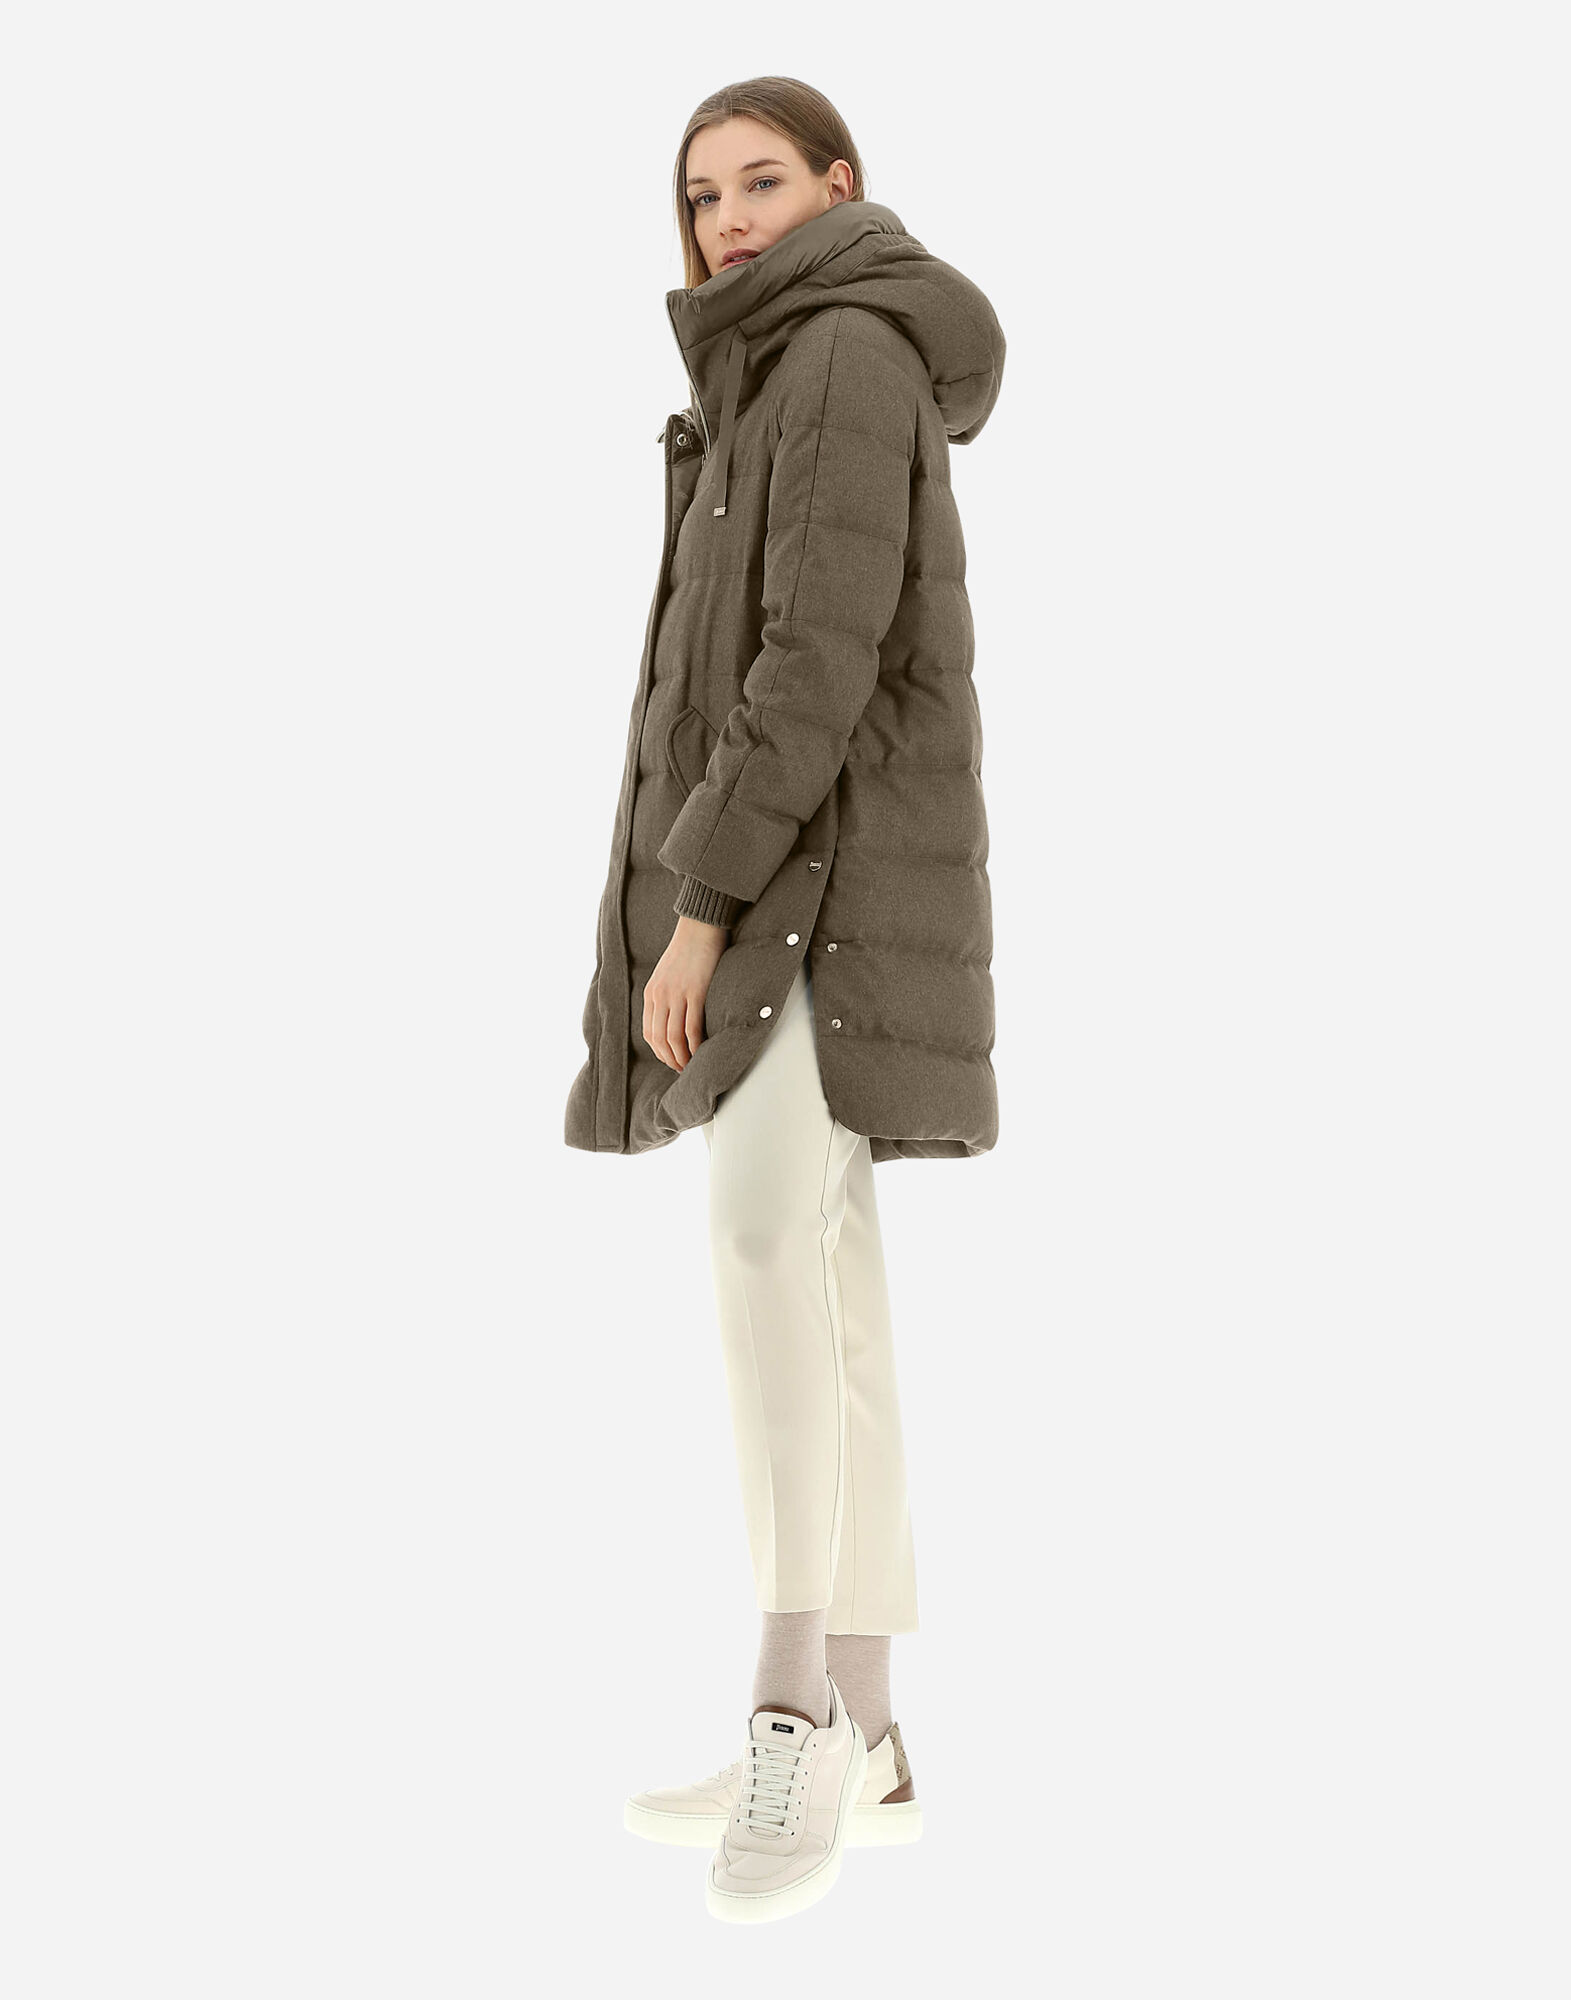 SILK AND CASHMERE PARKA in Military for Women | Herno®